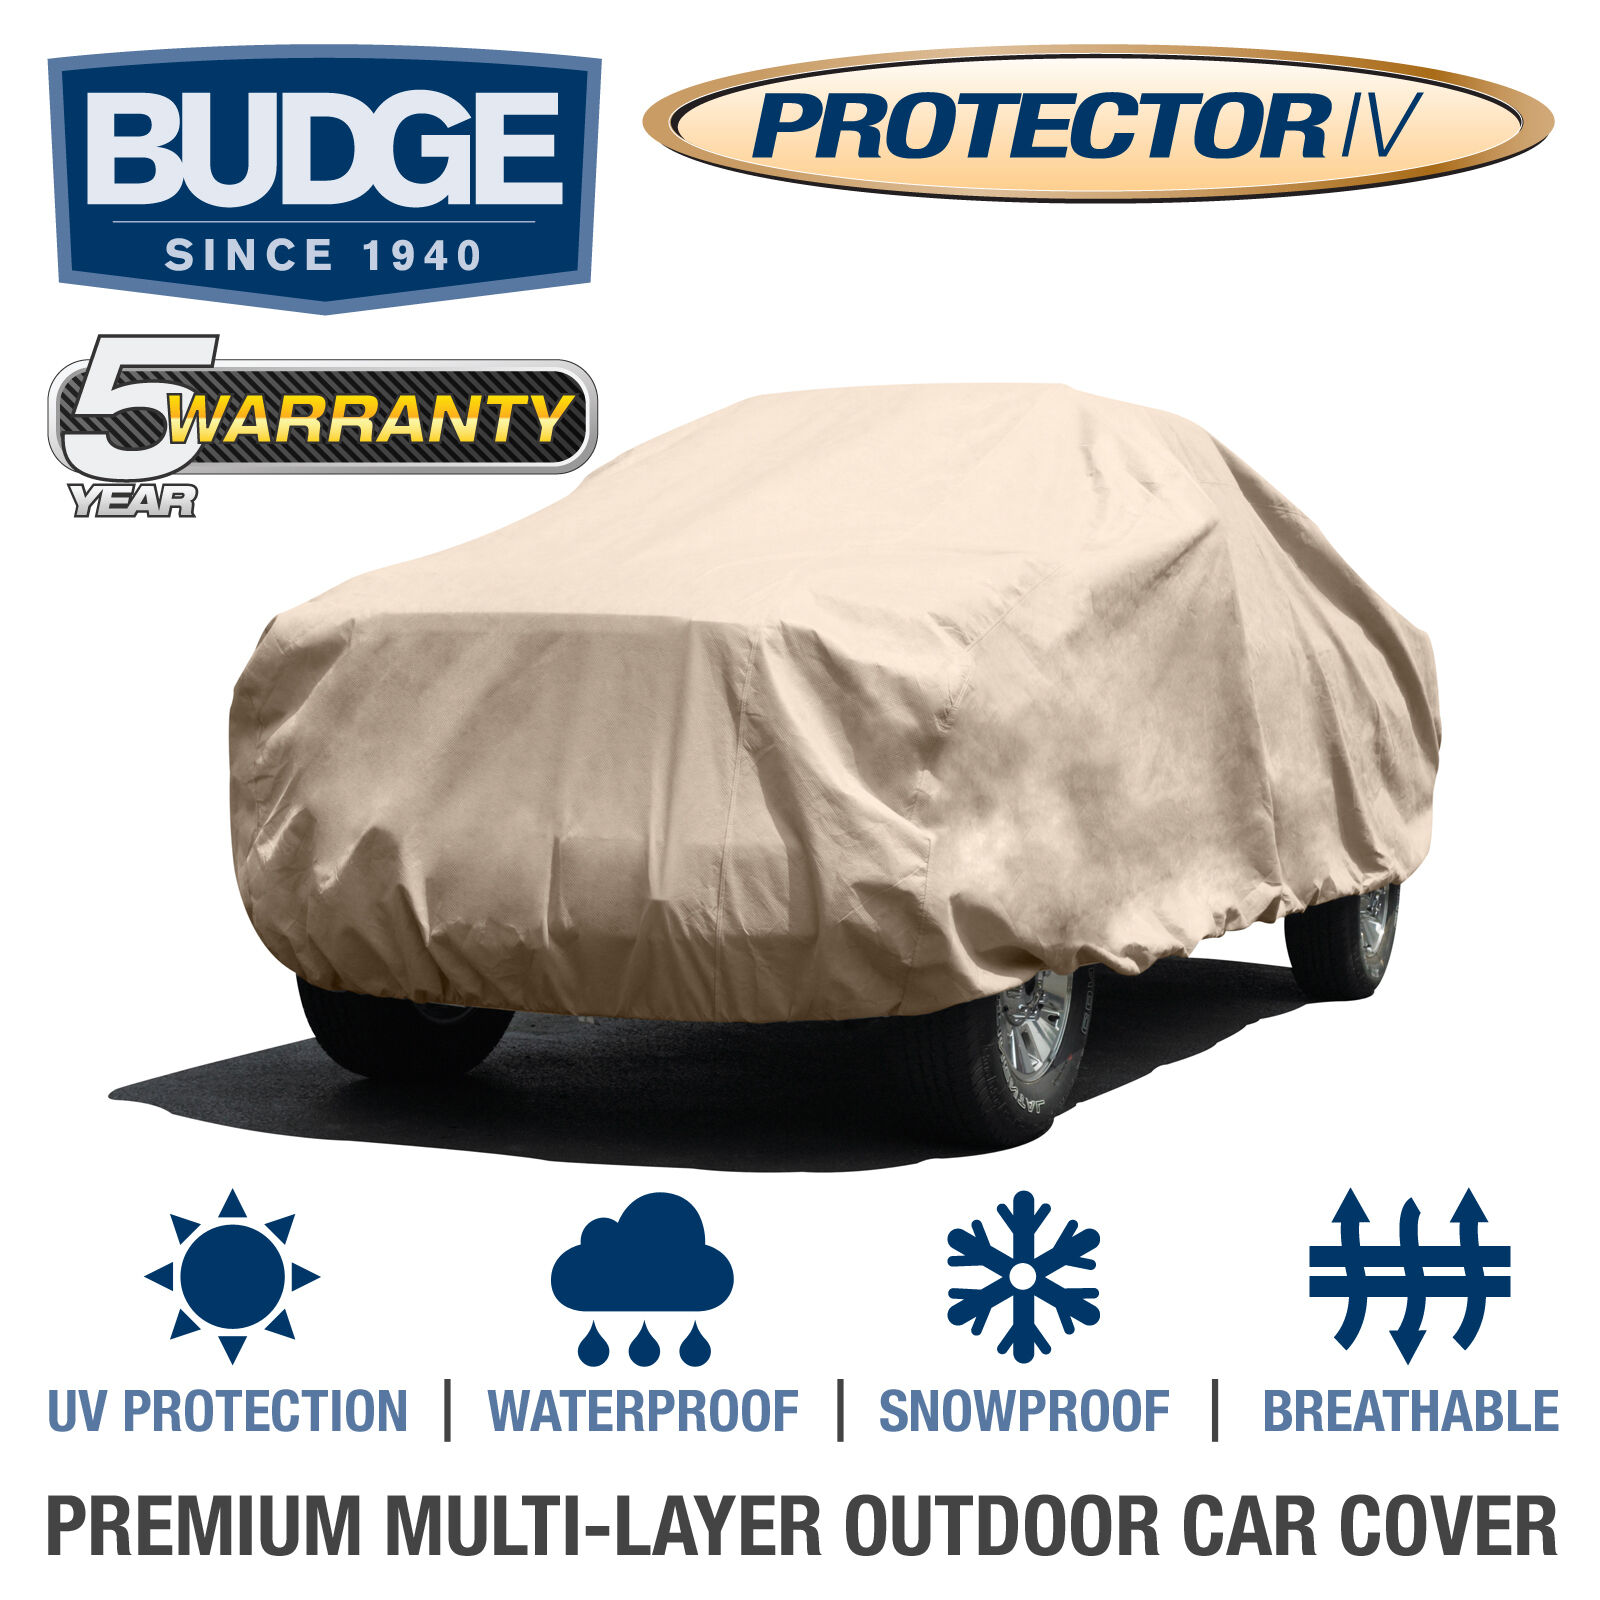 Budge Protector IV Truck Cover Fits Standard Cab Long Bed up to 19\'9\